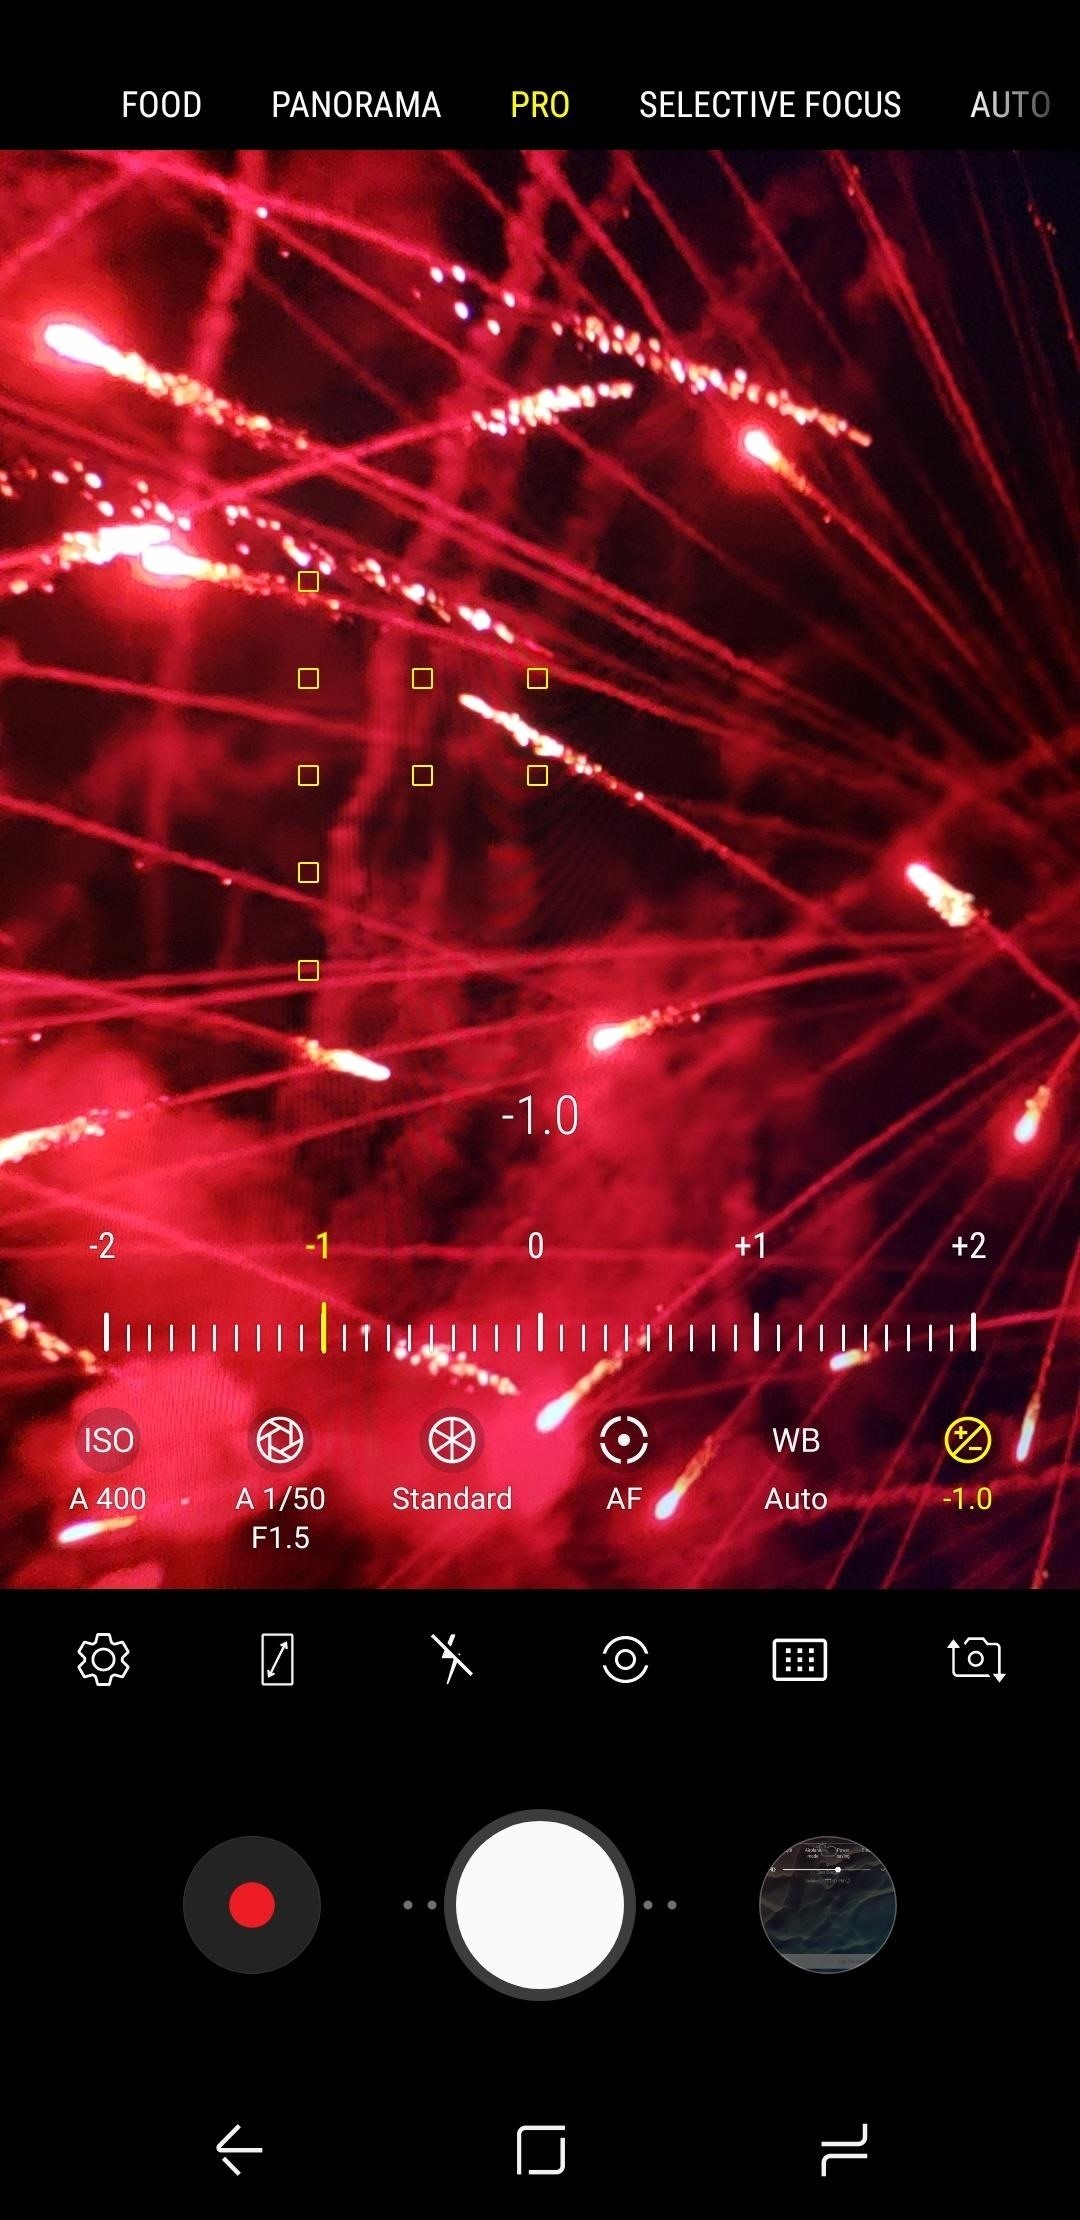 How to Take Perfect Fireworks Photos with Your Android Phone